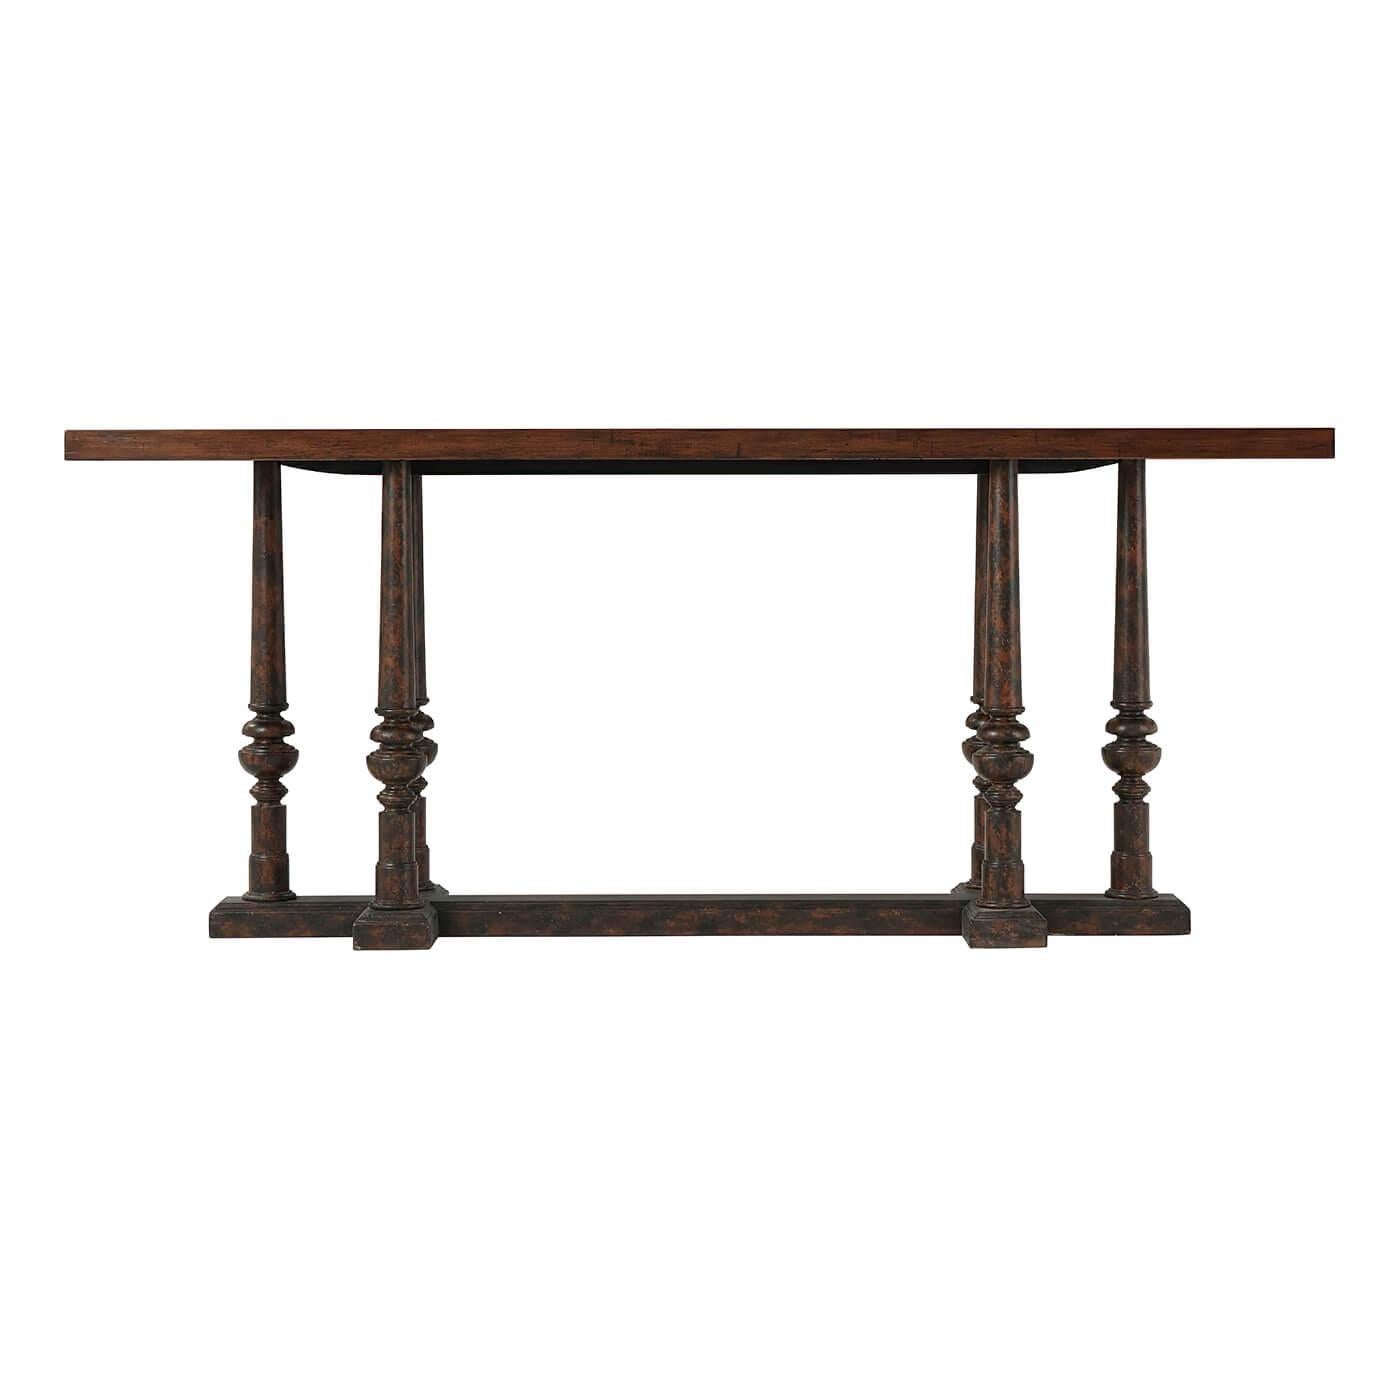 European Rustic Parquetry Console Table